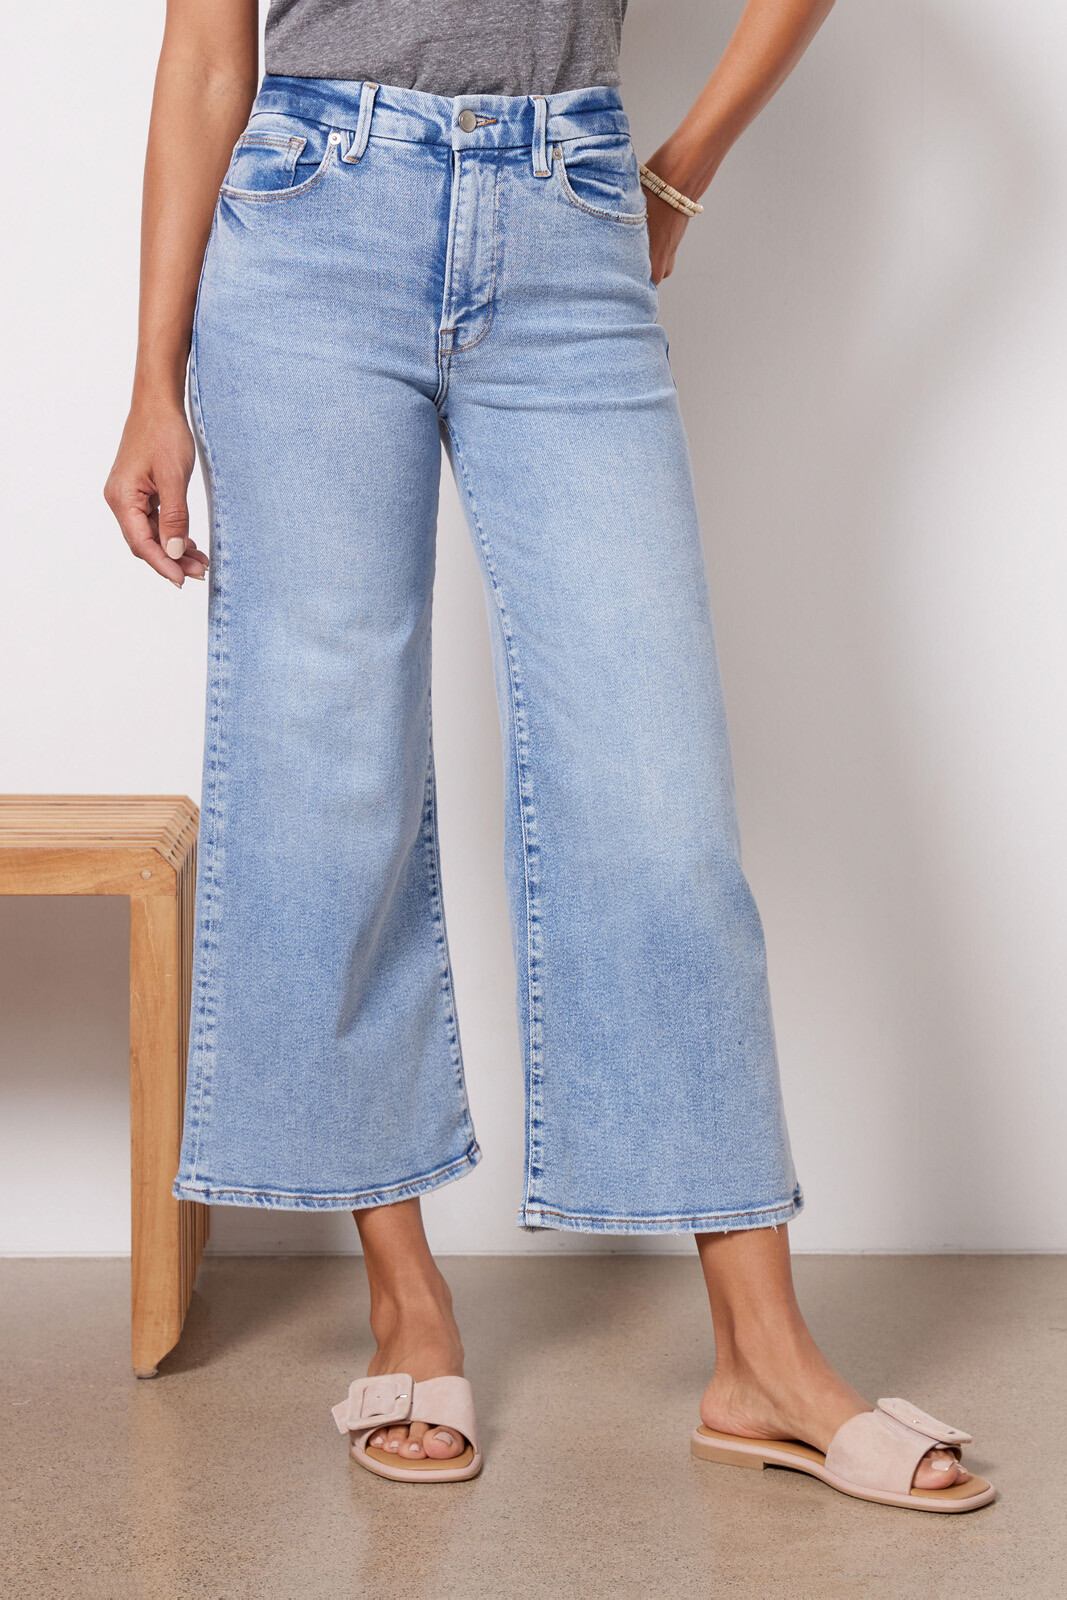 We Tried Good American Good Waist Palazzo Jeans (Think: High Rise